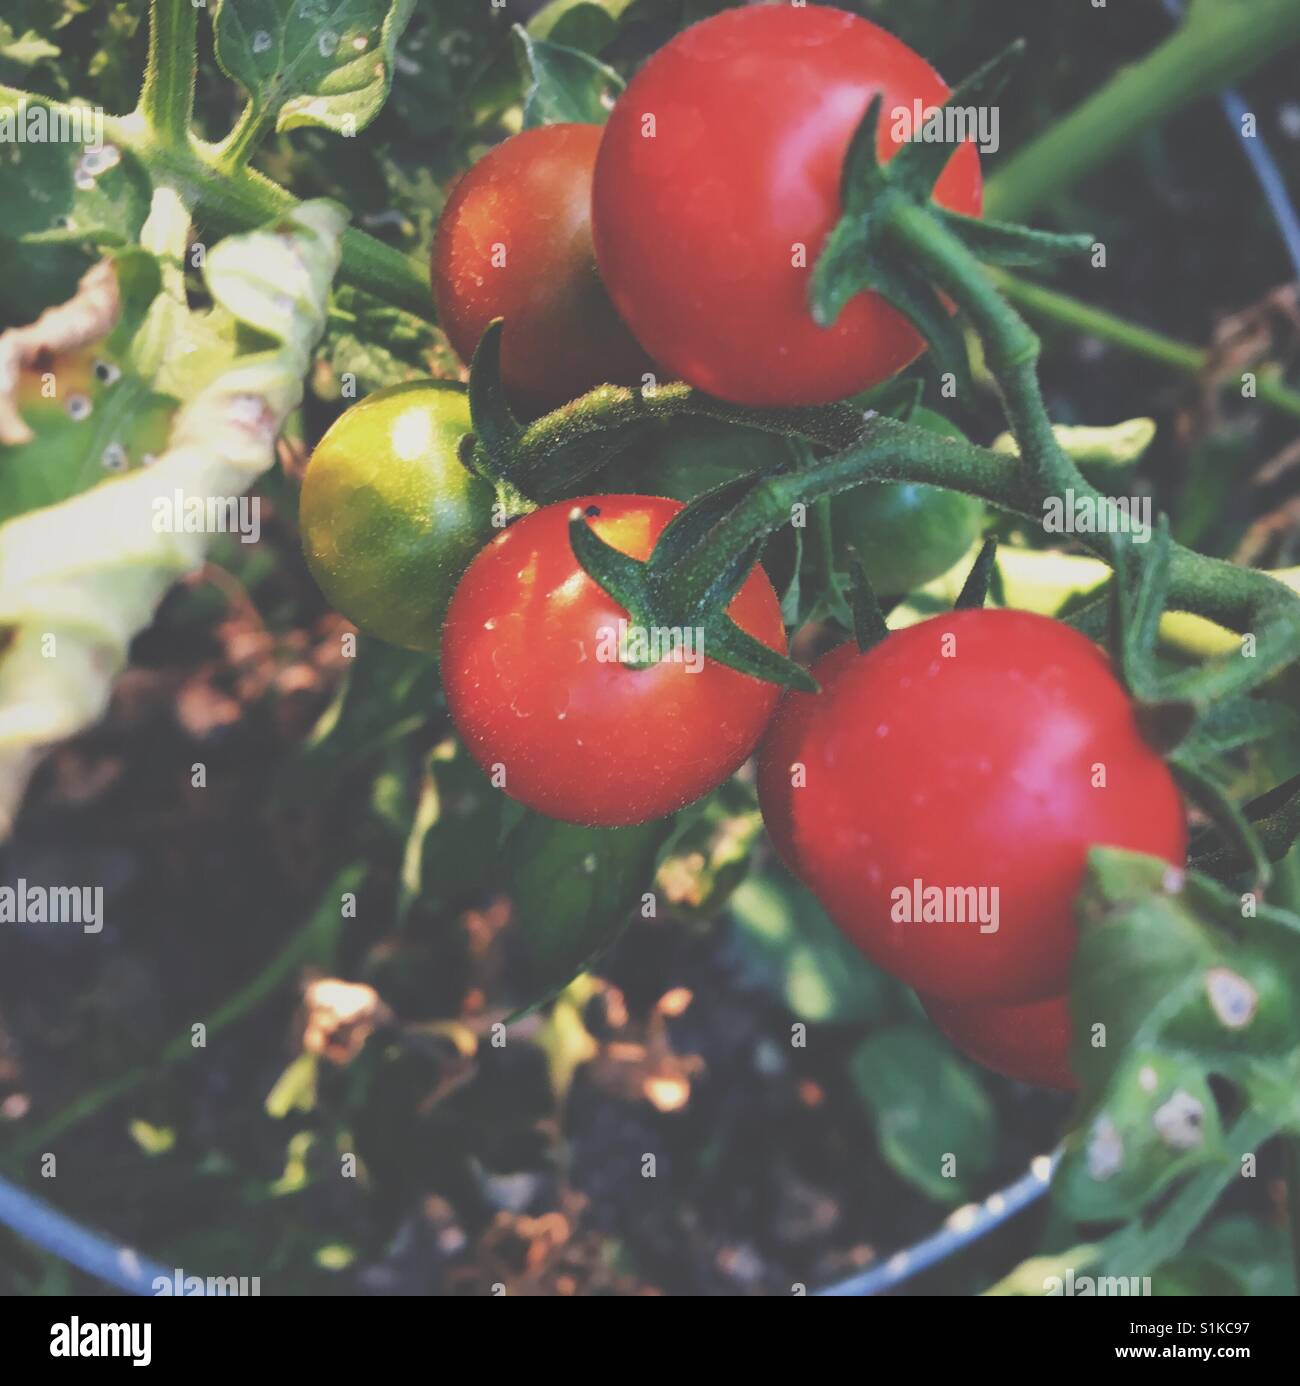 Tomatoes growing and ripening on the vine in a garden. Square crop. Stock Photo